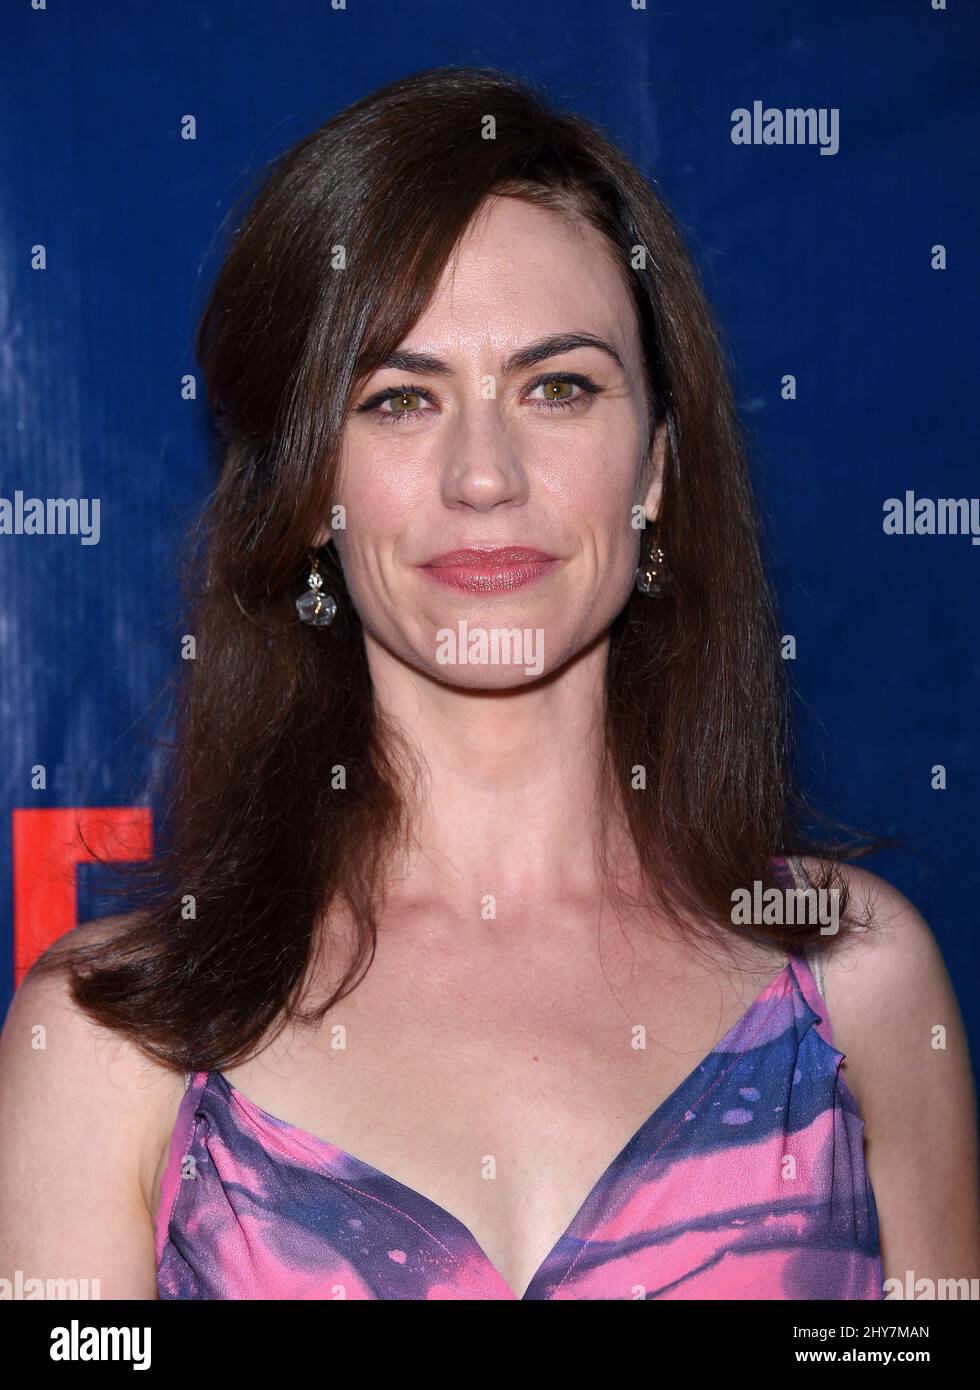 Maggie Siff attending the CBS, The CW and Showtime Summer TCA press tour. Stock Photo